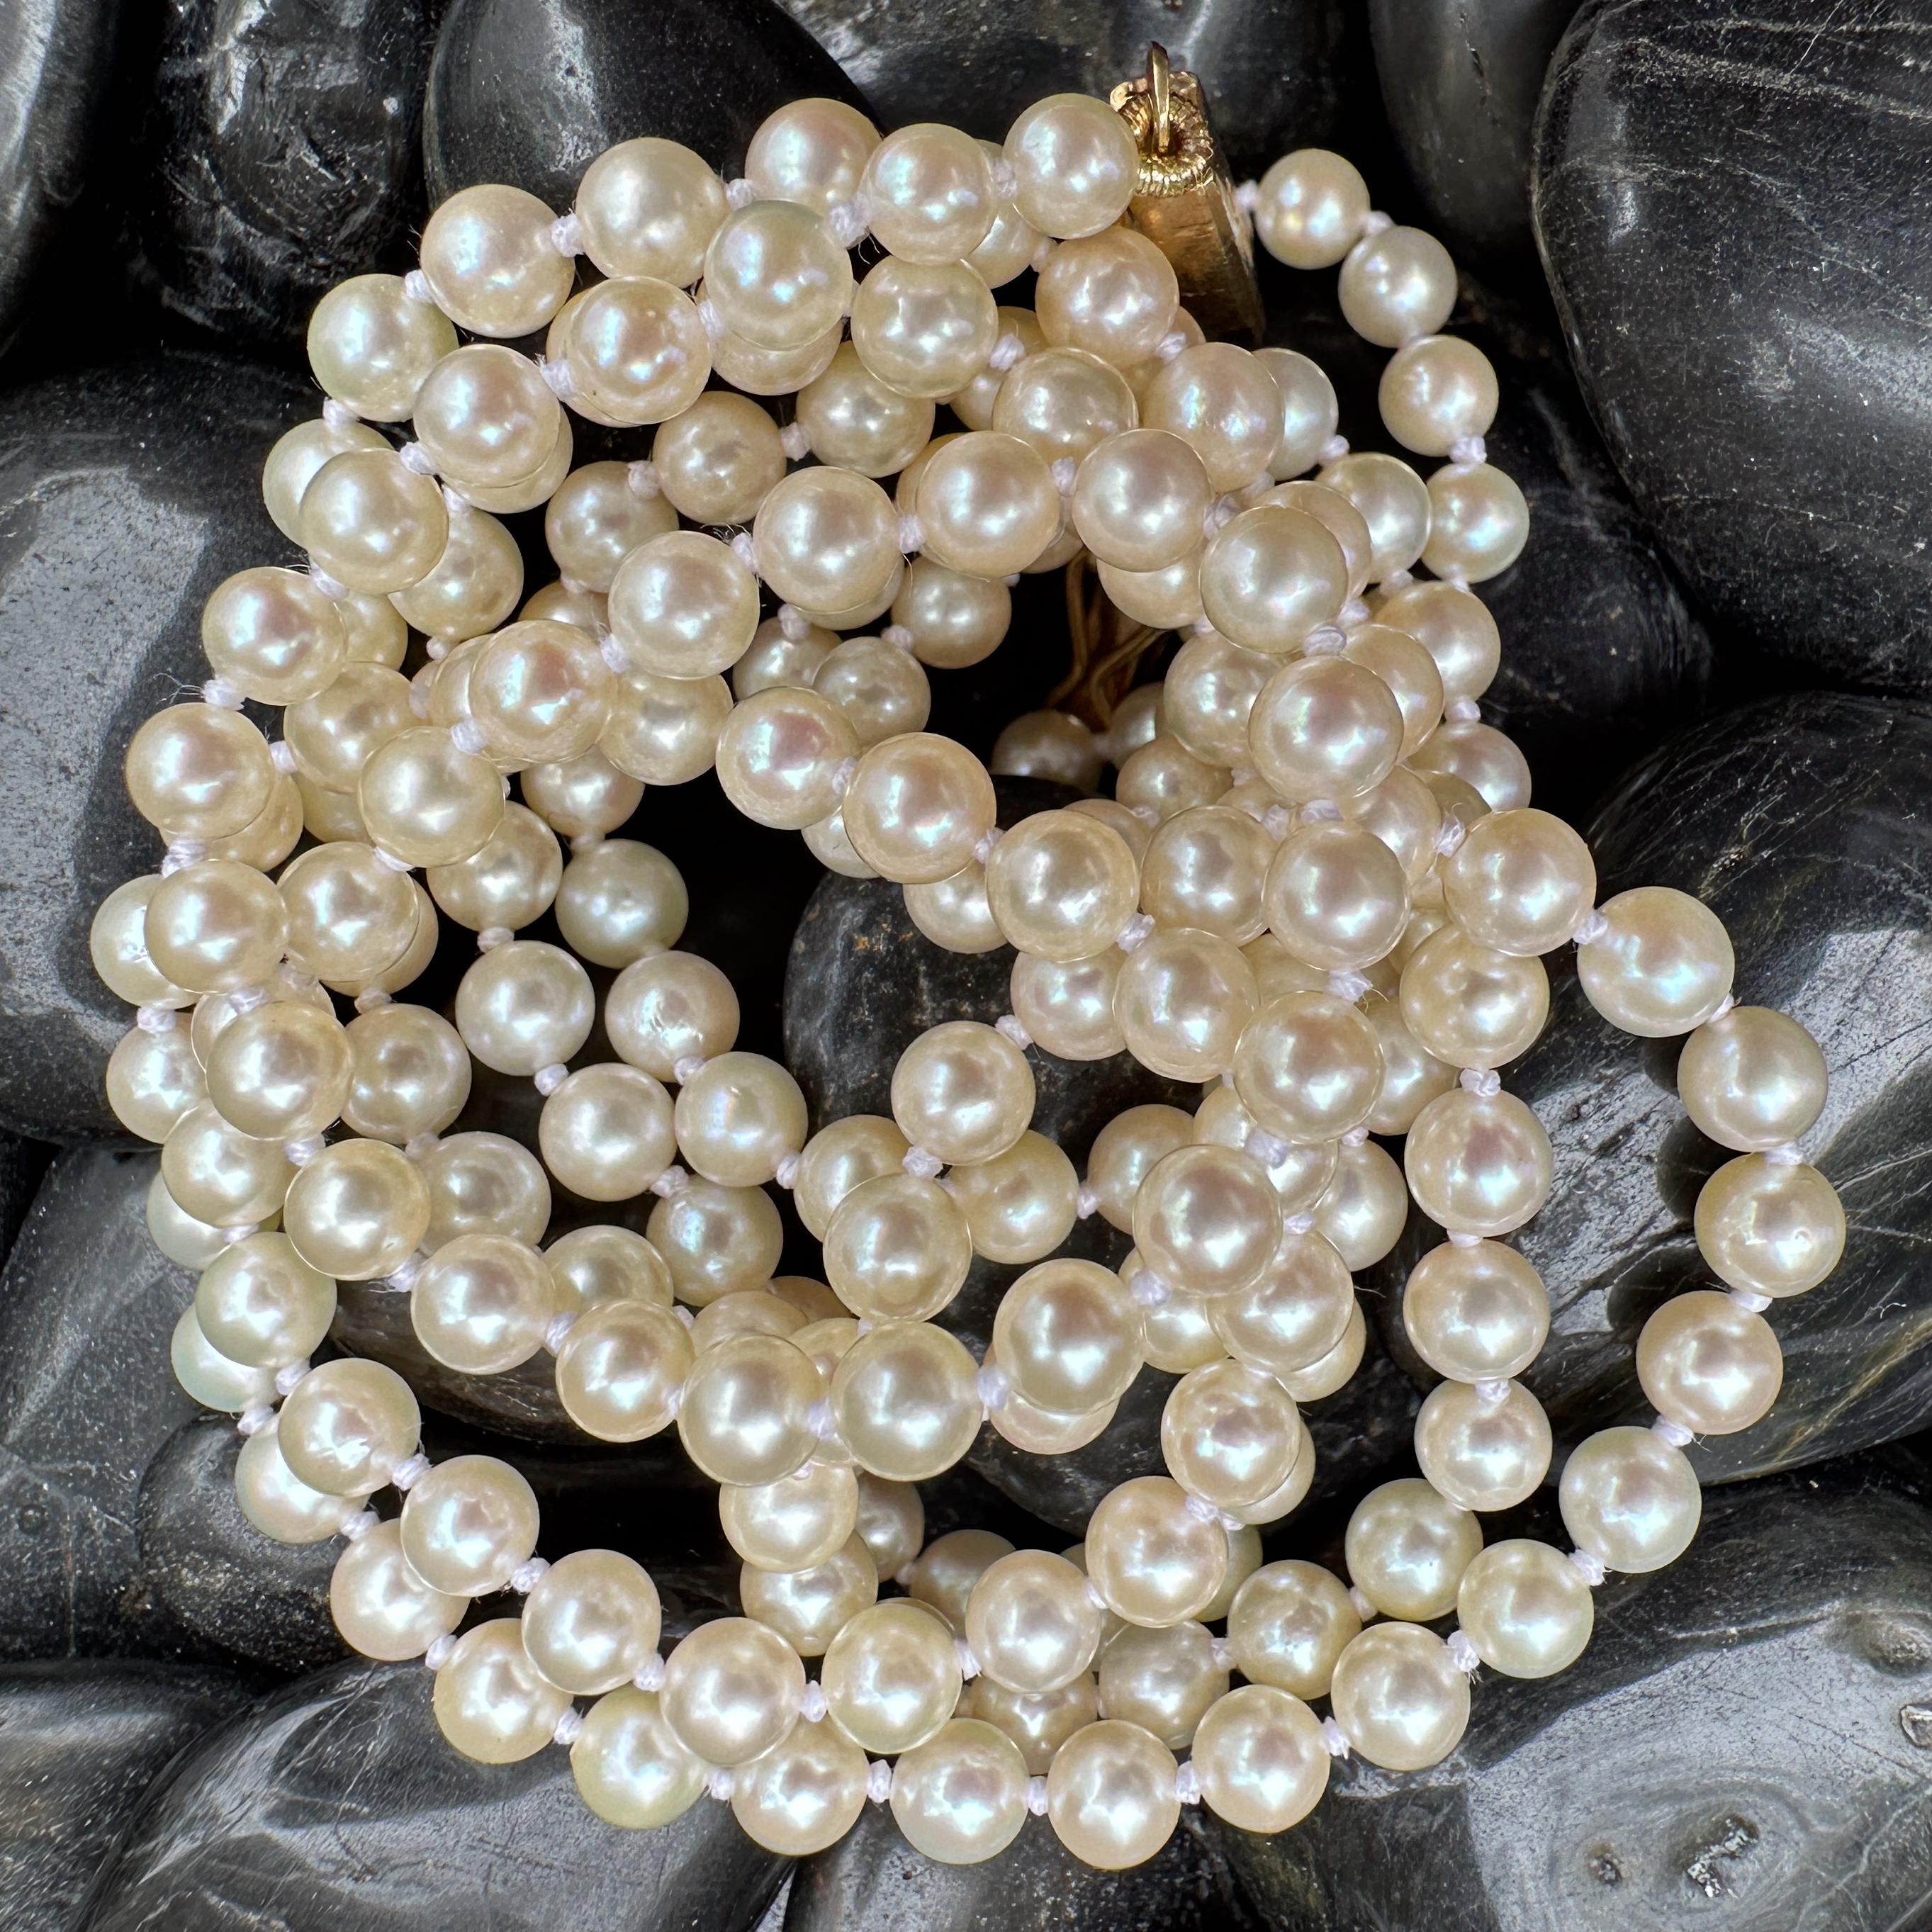 Opera Length Strand of Japanese Akoya Cultured Pearls with 14k Gold Clasp 1